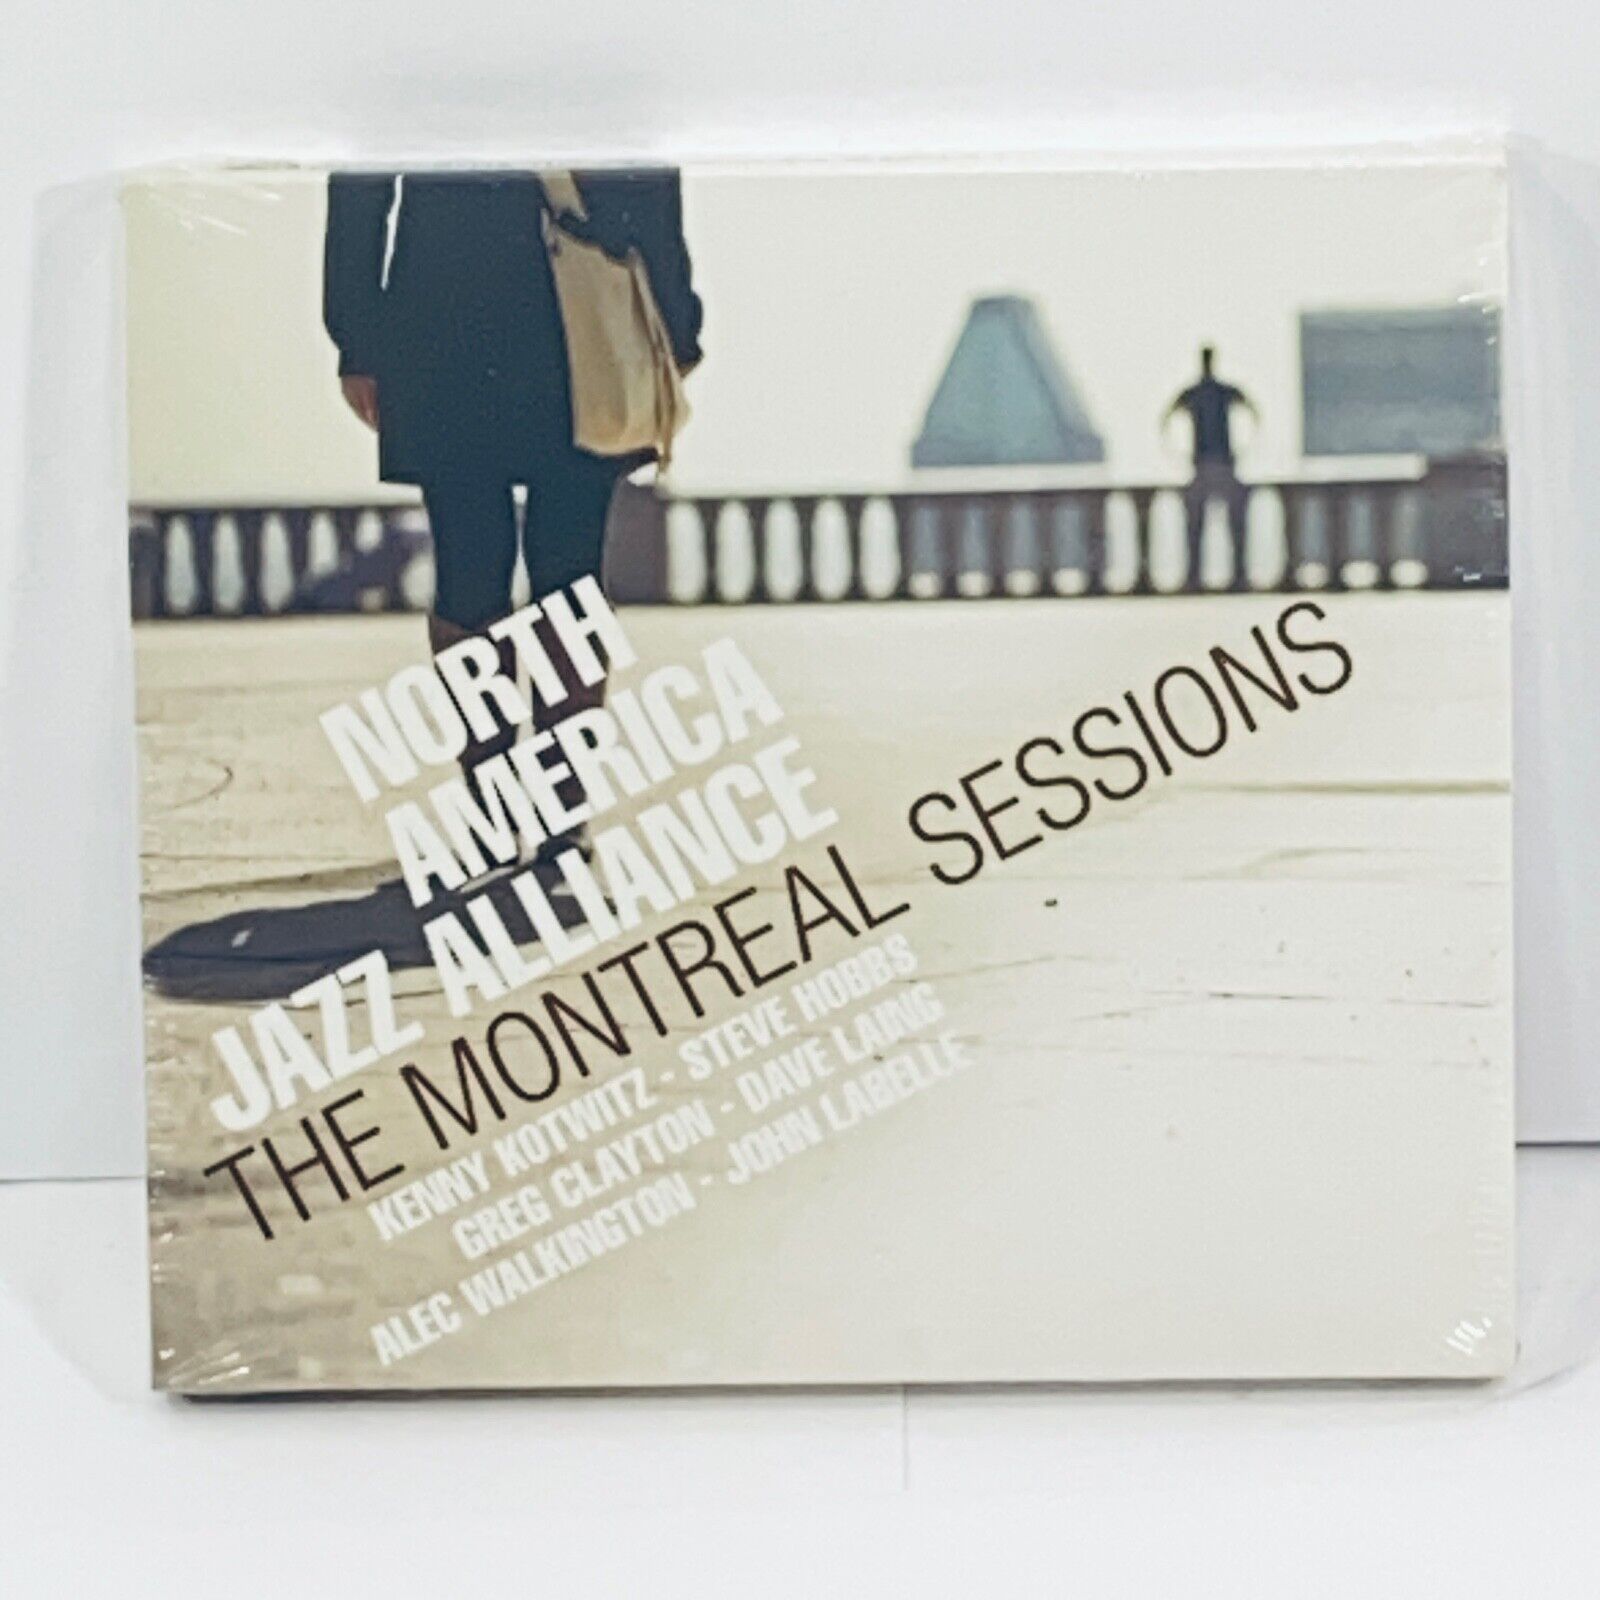 NORTH AMERICAN  JAZZ ALLIANCE - THE MONTREAL SESSIONS - 2012 -  CD SEALED